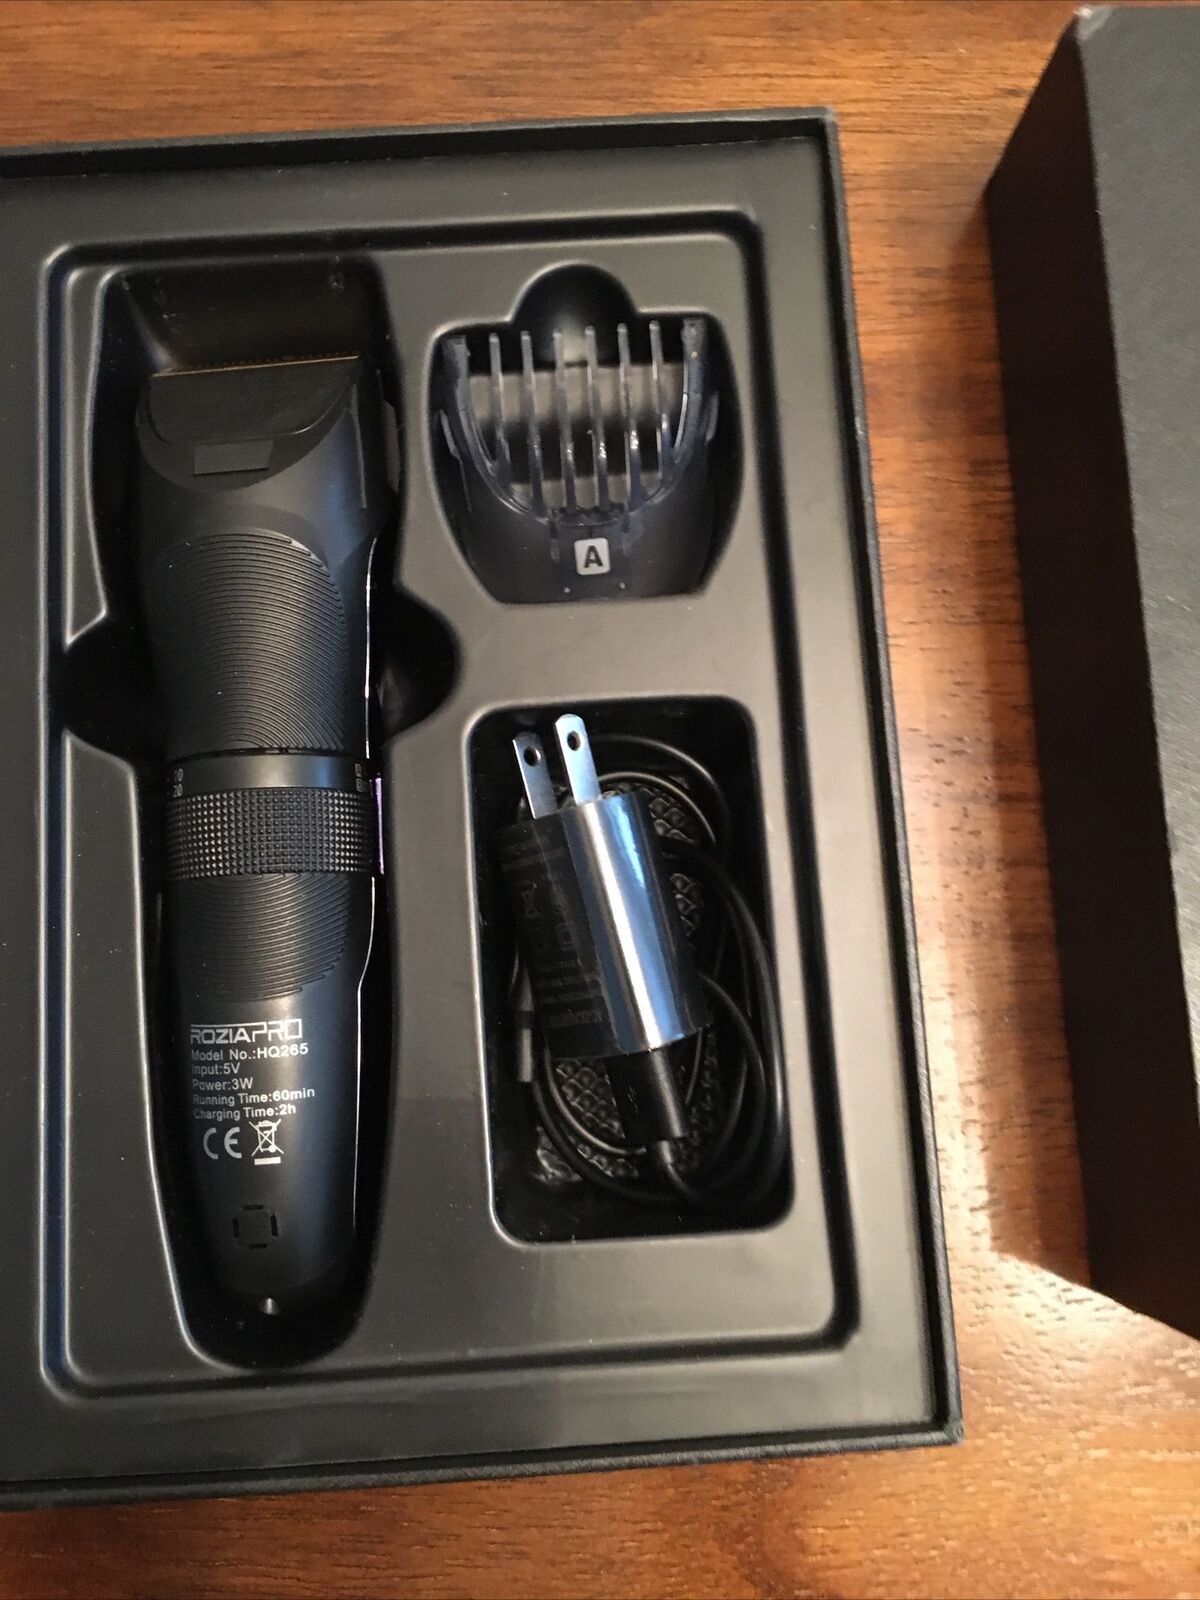 NEW Mesa Mall Roziapro Electric Hair Cutter Model No. HQ 265 National products Pow V Input 5